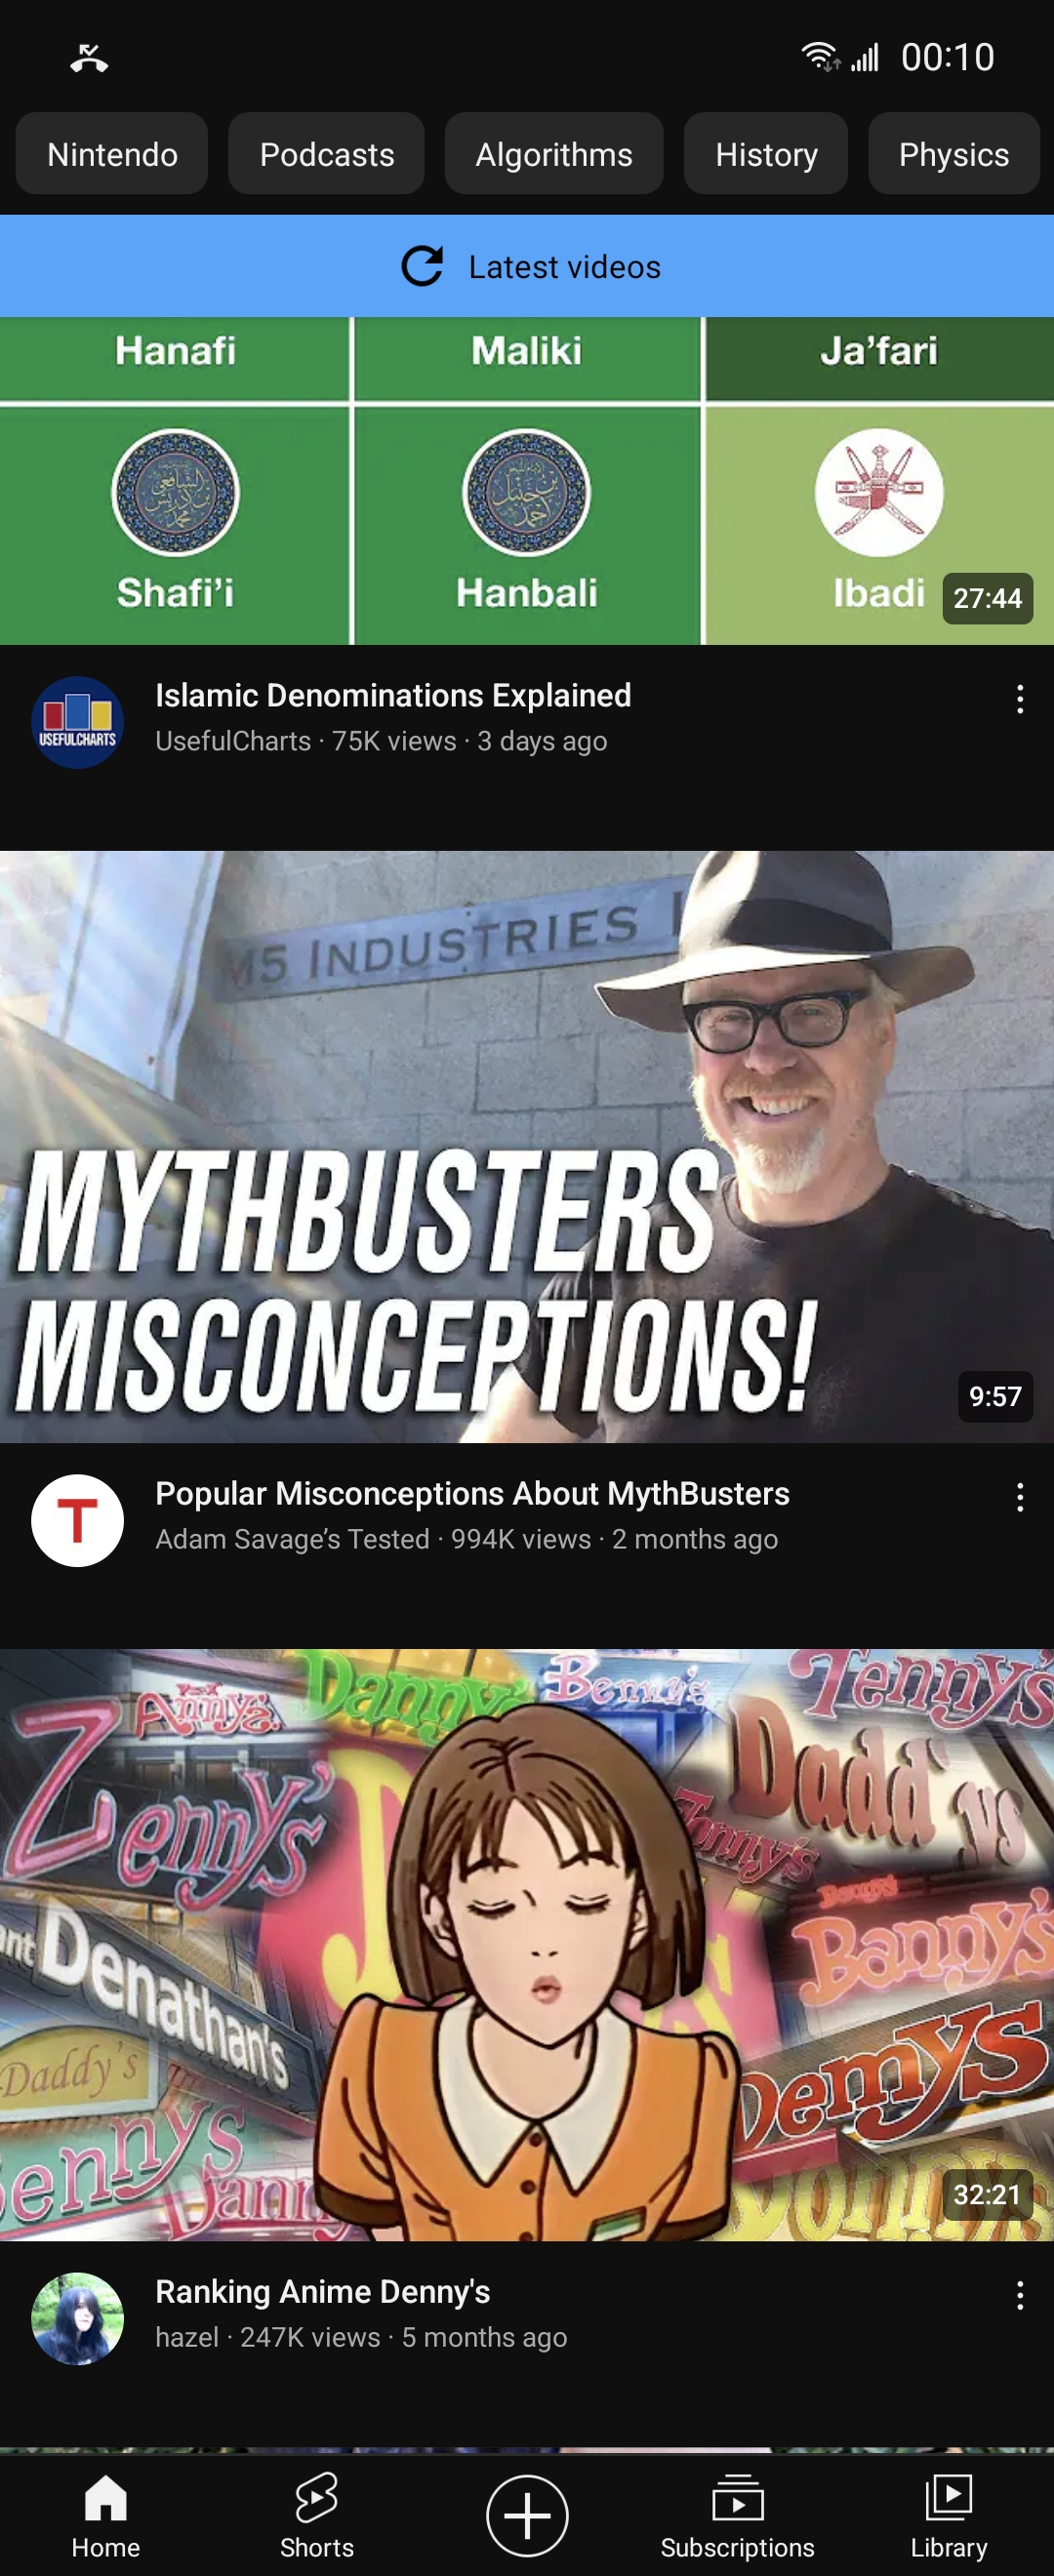 A mobile screenshot of the Youtube home page showing three videos: "Islamic Denominations Explained" by Useful Charts, "Popular Misconceptions About Mythbusters" by Adam Savage's Tested, and "Ranking Anime Denny's" by hazel